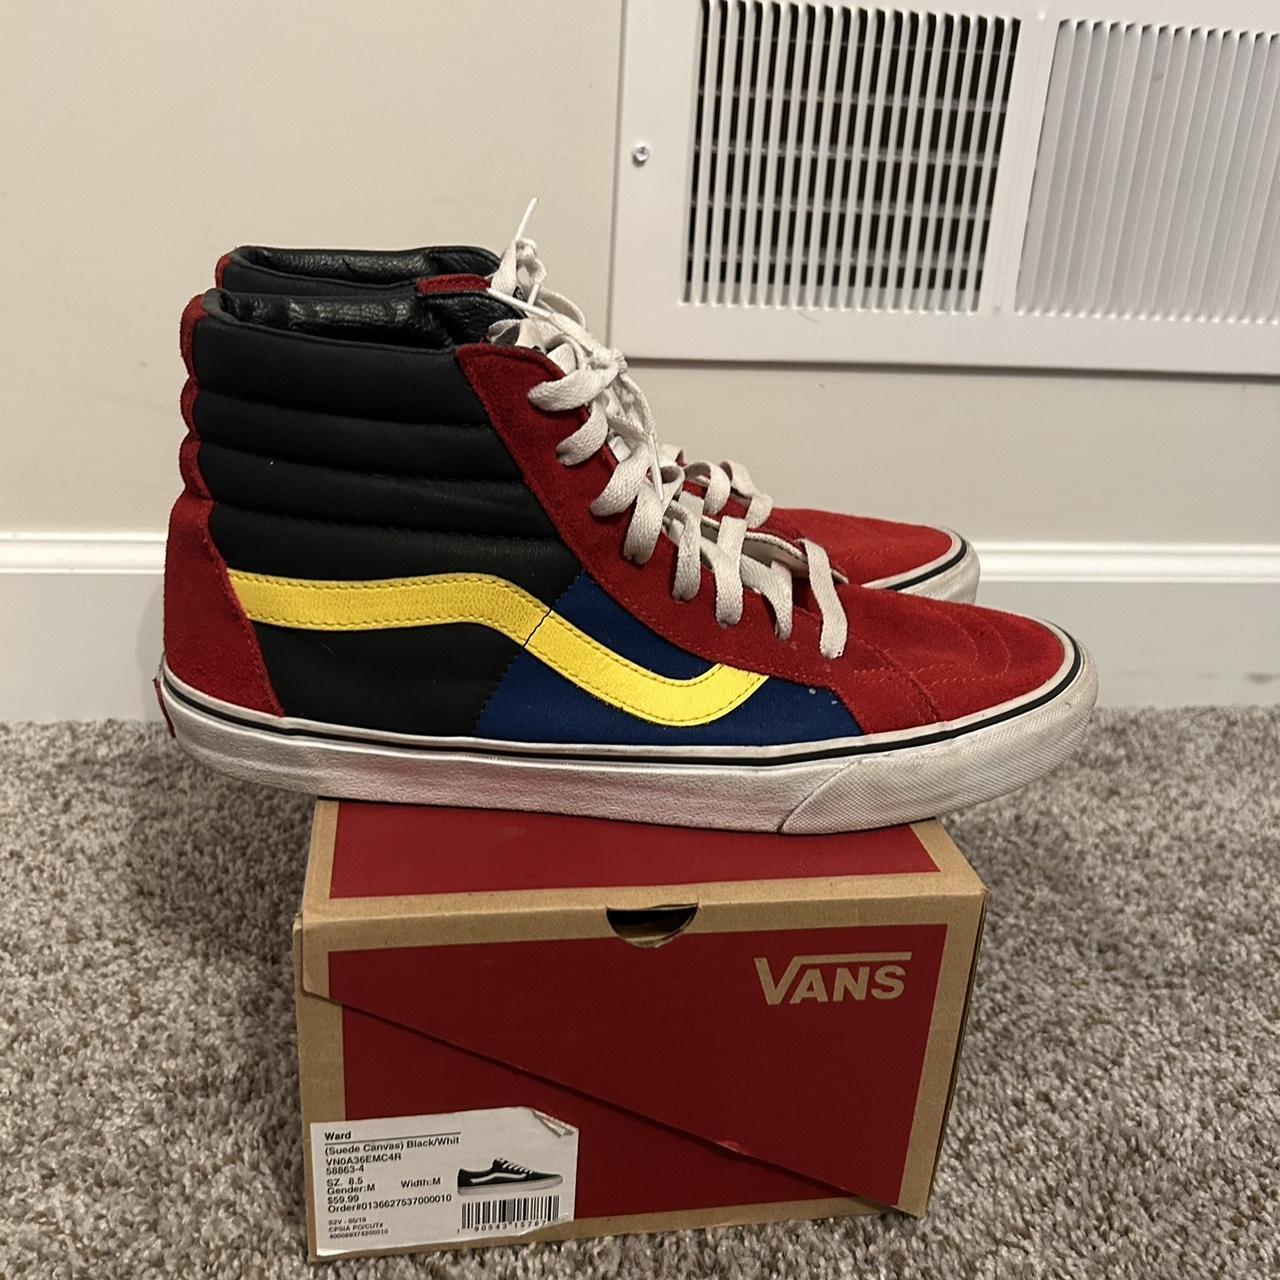 Vans Men's Red and Yellow Trainers (4)